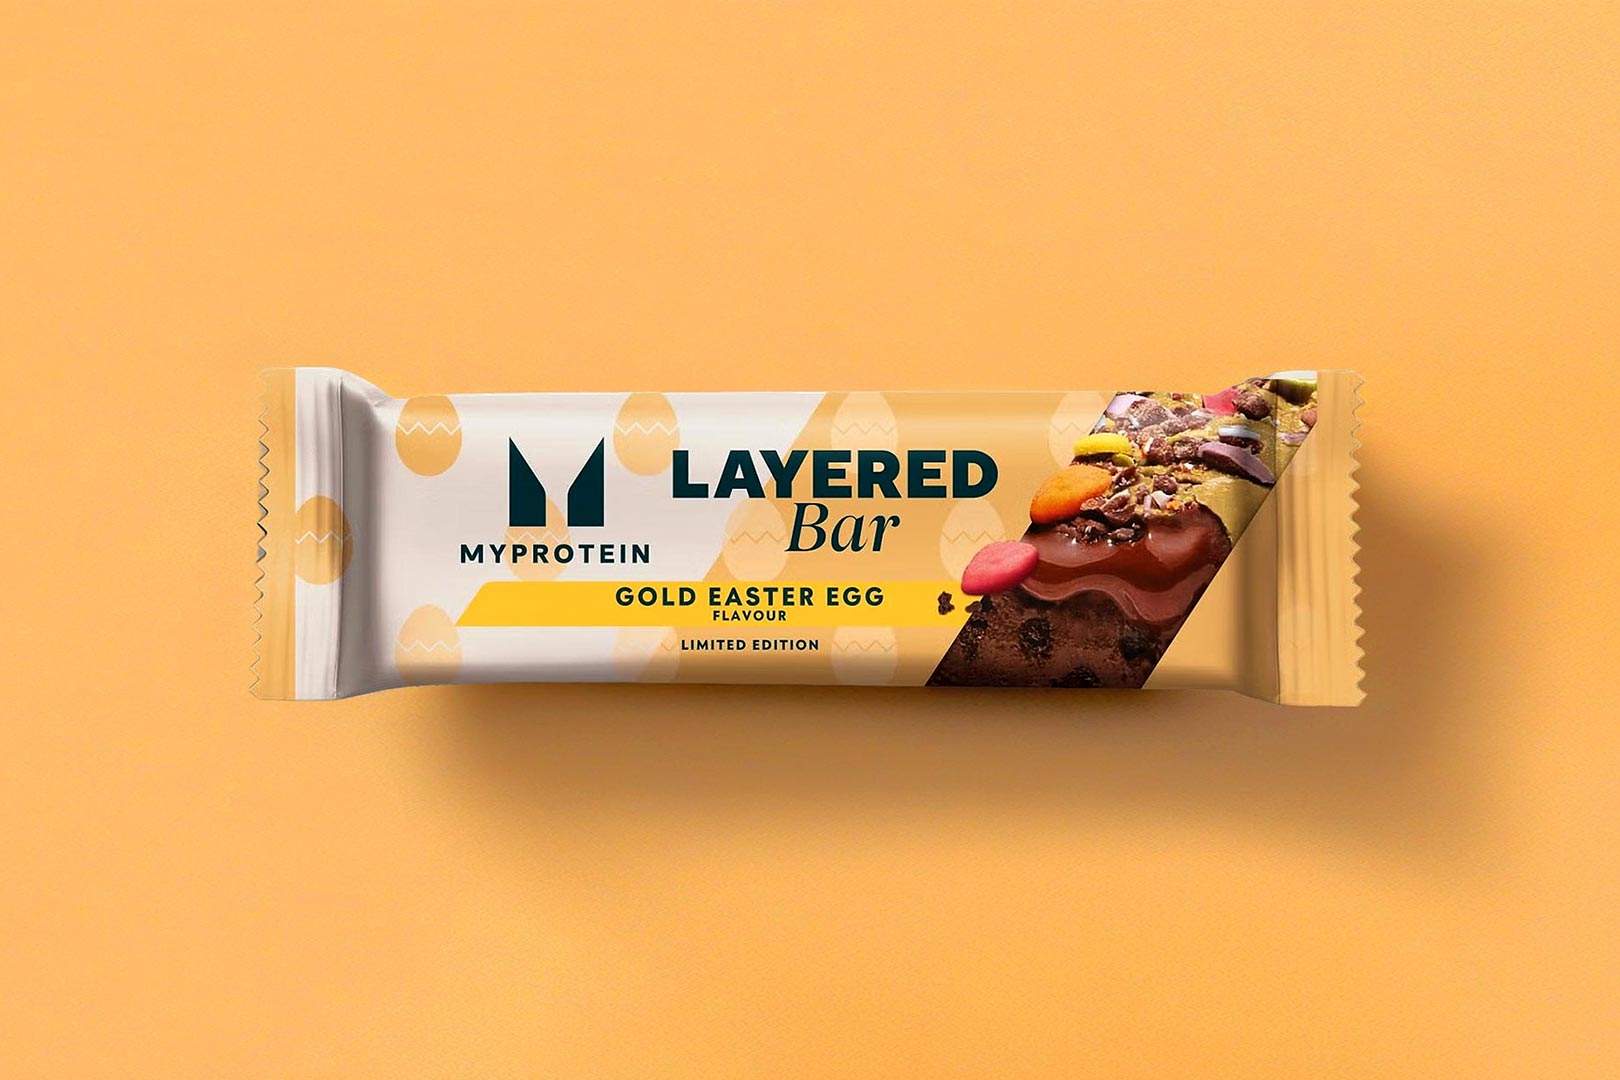 Myprotein Gold Easter Egg Layered Protein Bar